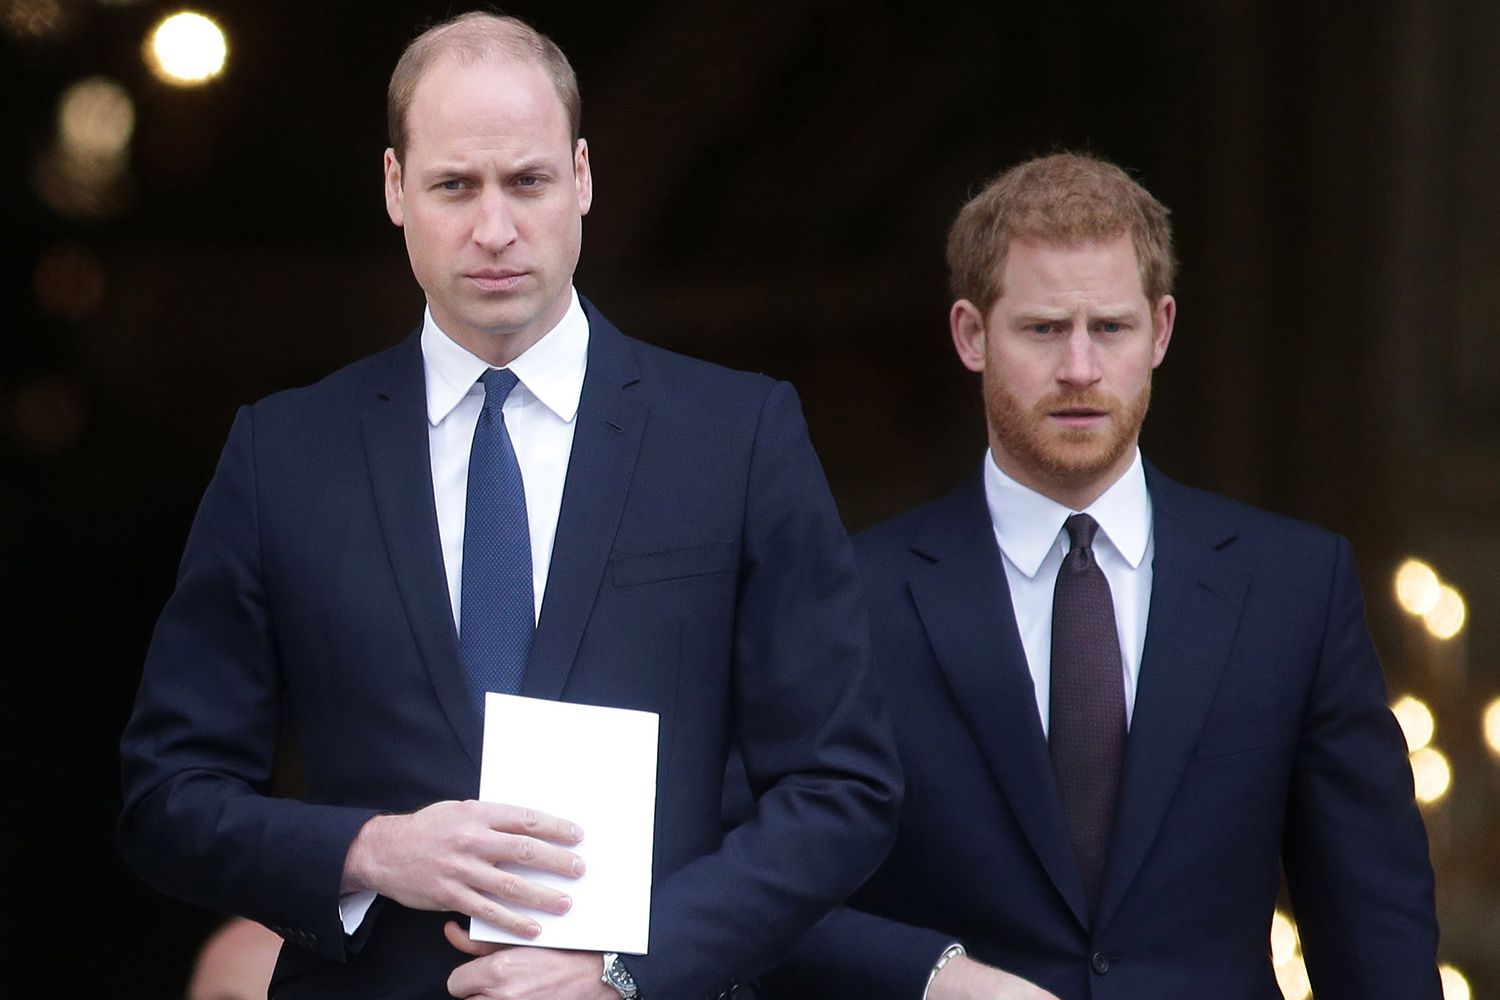 William And Harry’s Surprising Act In The Hospital